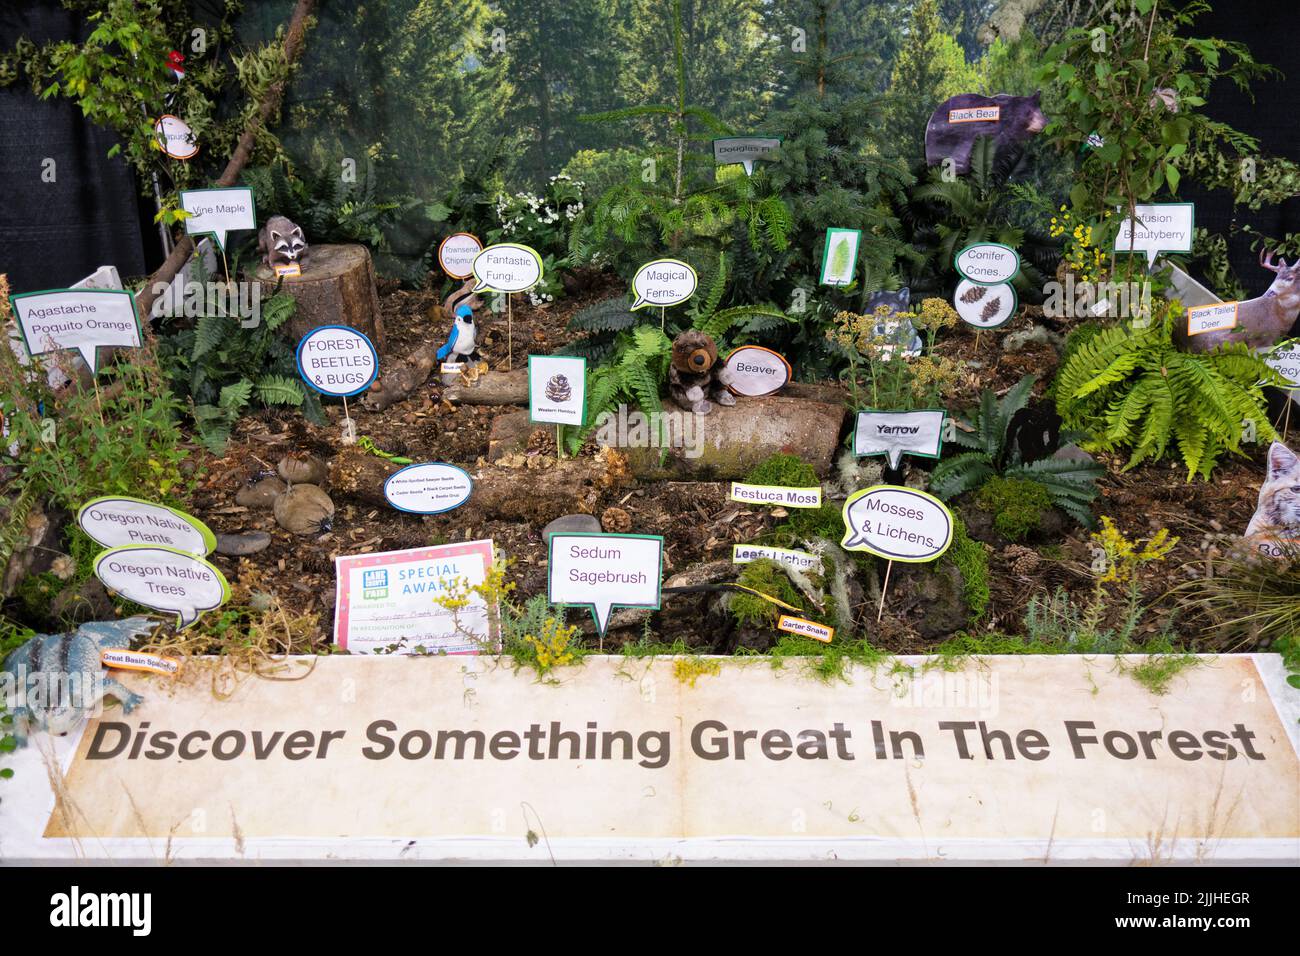 A display about the things one finds in a forest,  created by the Spencer Creek Grange, at the Lane County Fair in Eugene, Oregon. Stock Photo